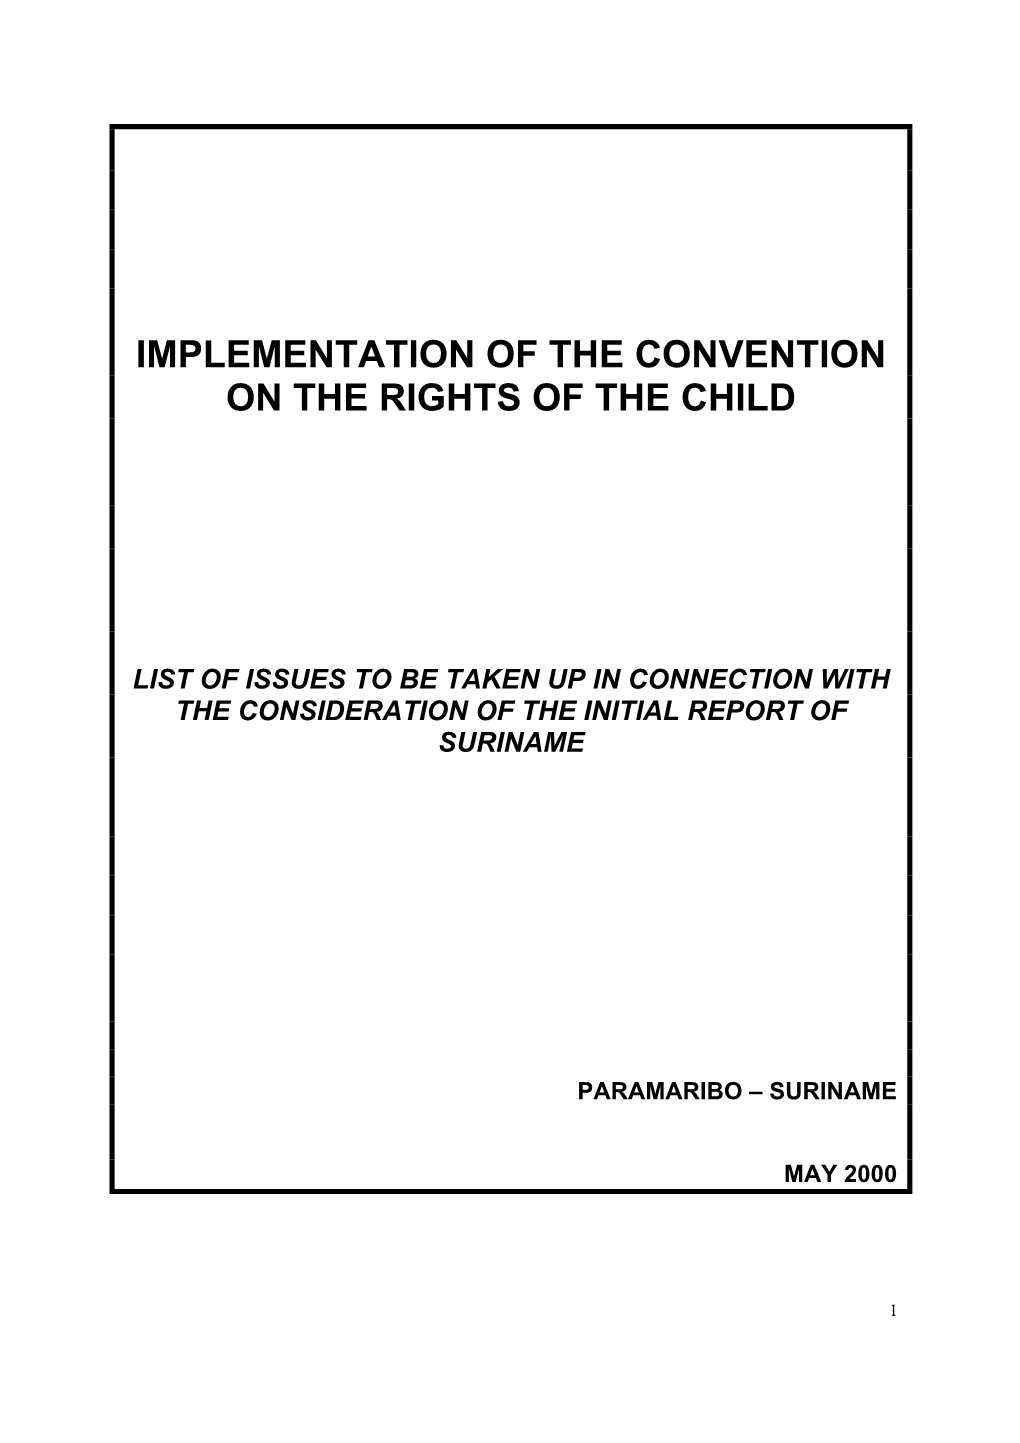 The Convention on the Rights of the Child Has Been Ratified in 1993 and Published in the Government Gazette in November 19